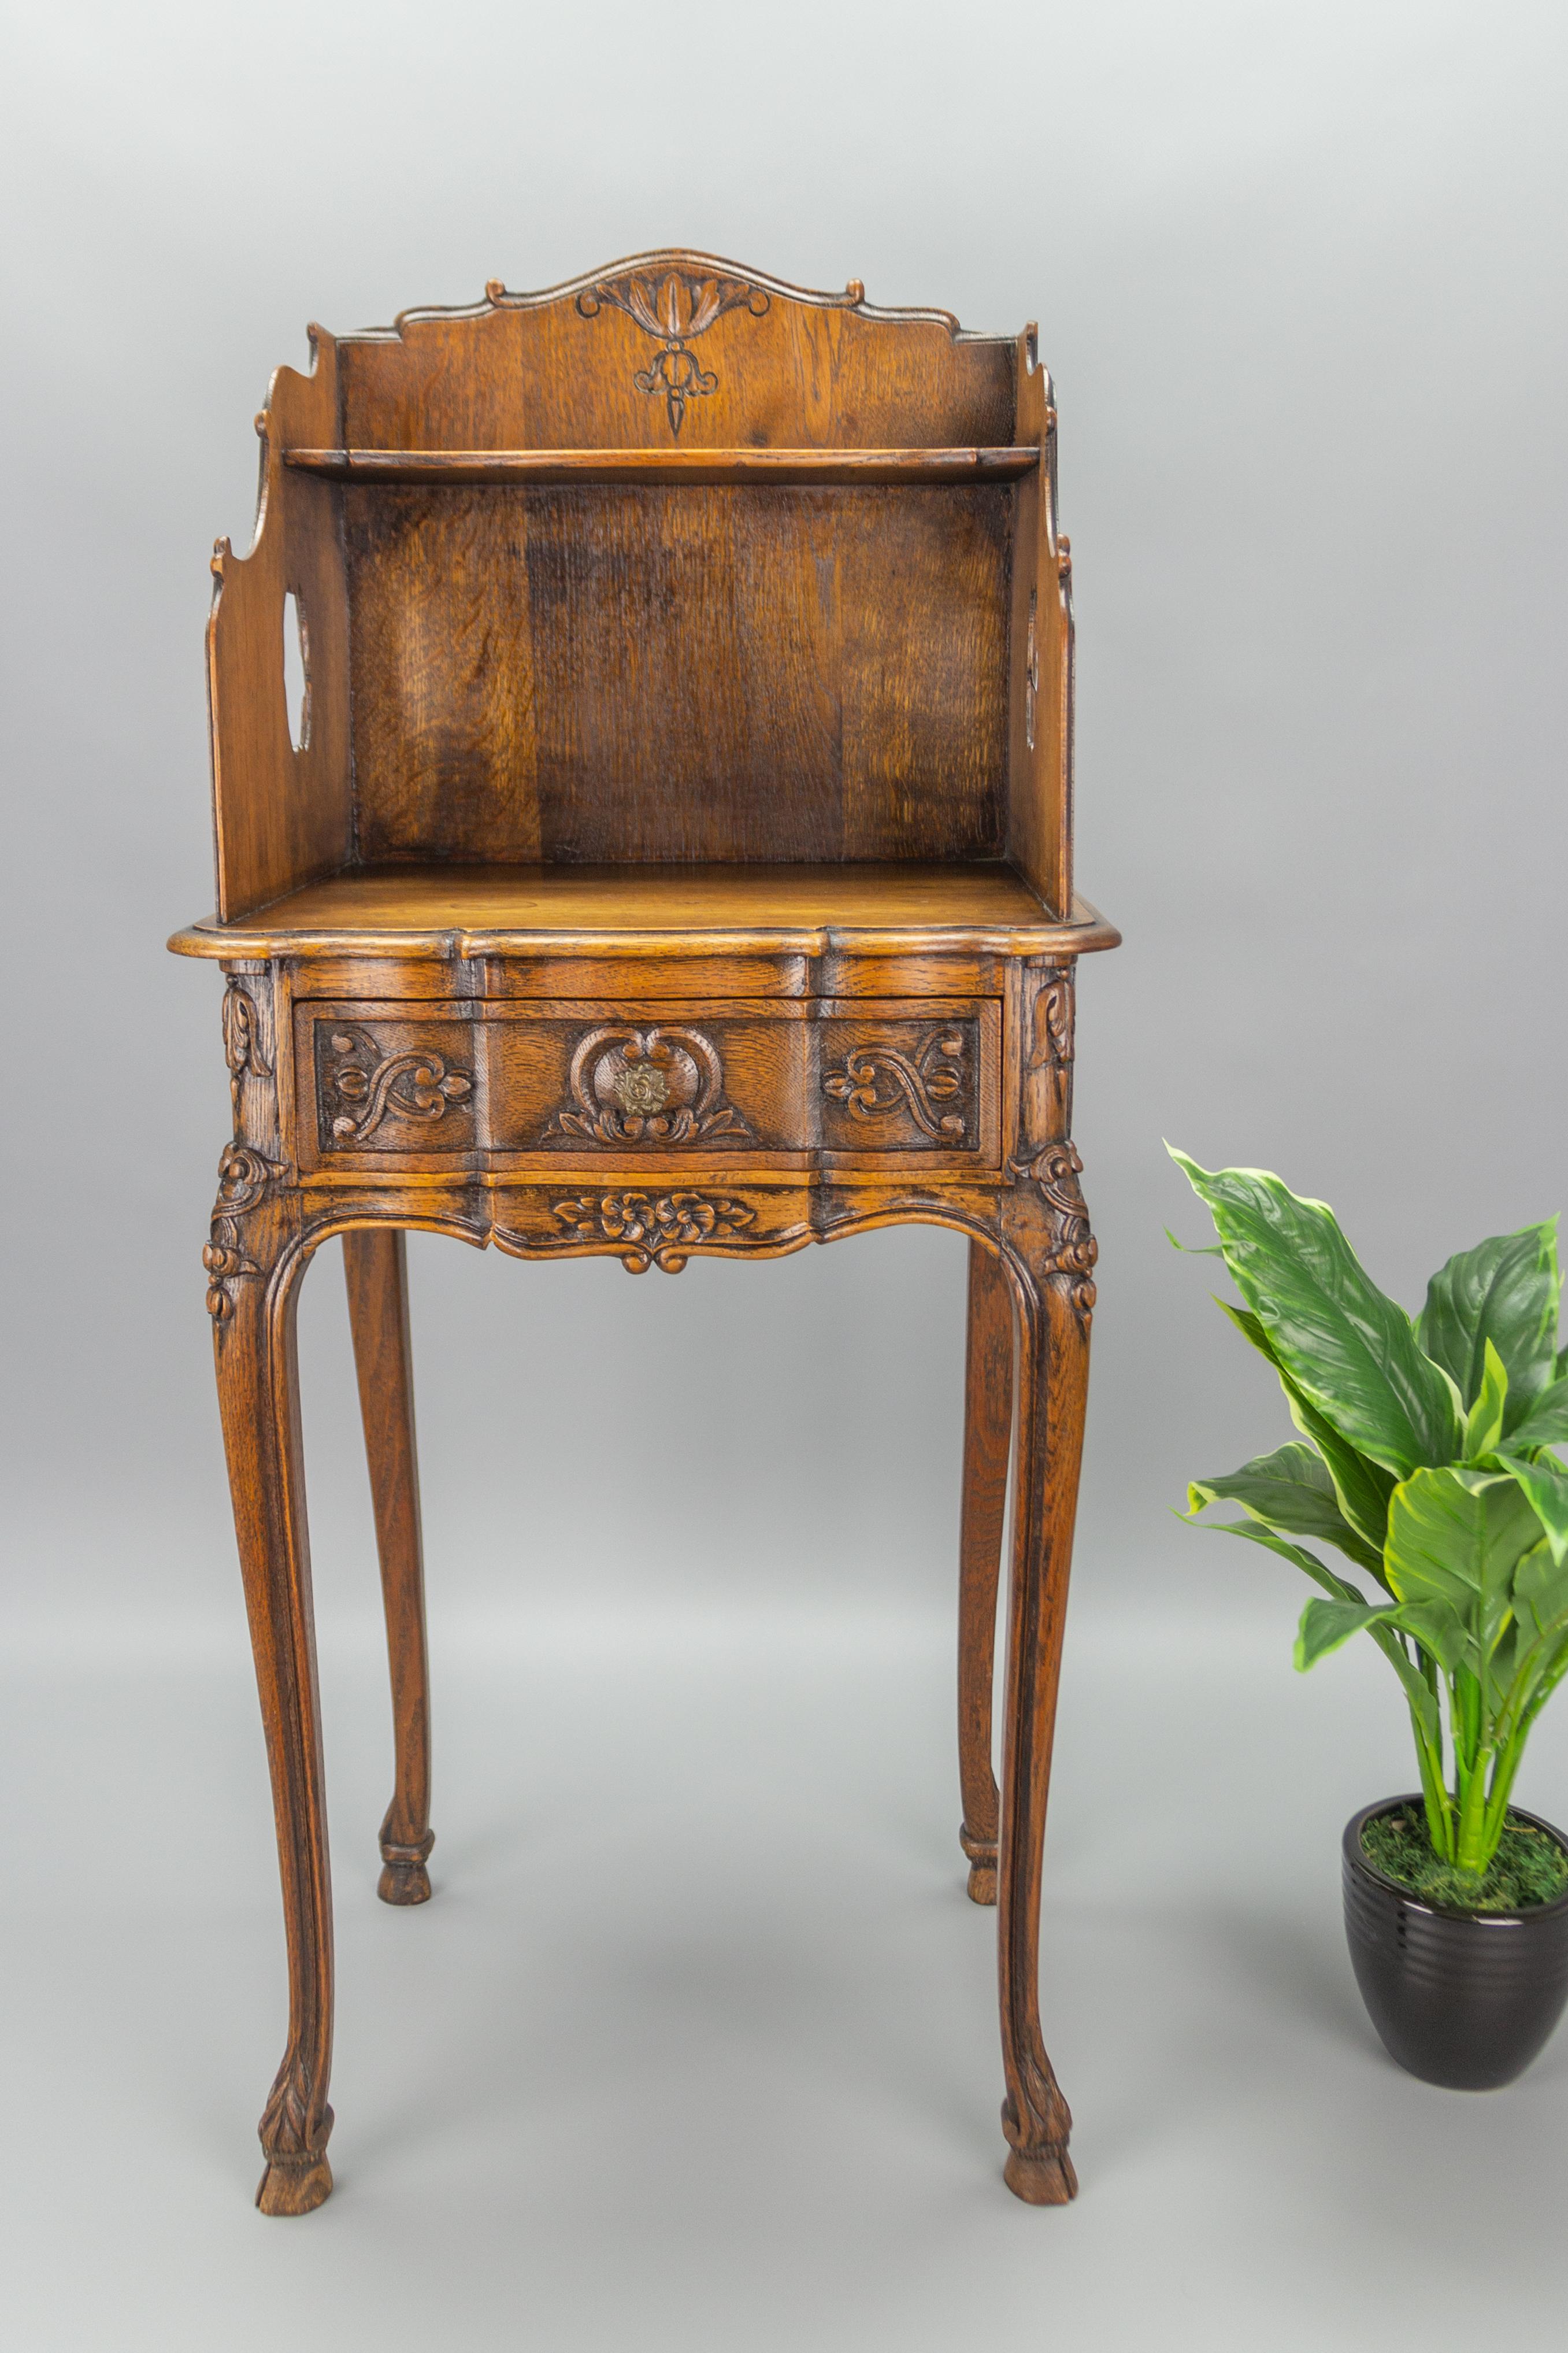 Charming French Louis XV or Rococo style nightstand or side table made of oak with beautiful carvings. The scalloped top shelf above open recess with a single drawer. Raised on graceful cabriole legs.
Dimensions: Height: 90 cm / 35.43 in; width: 40